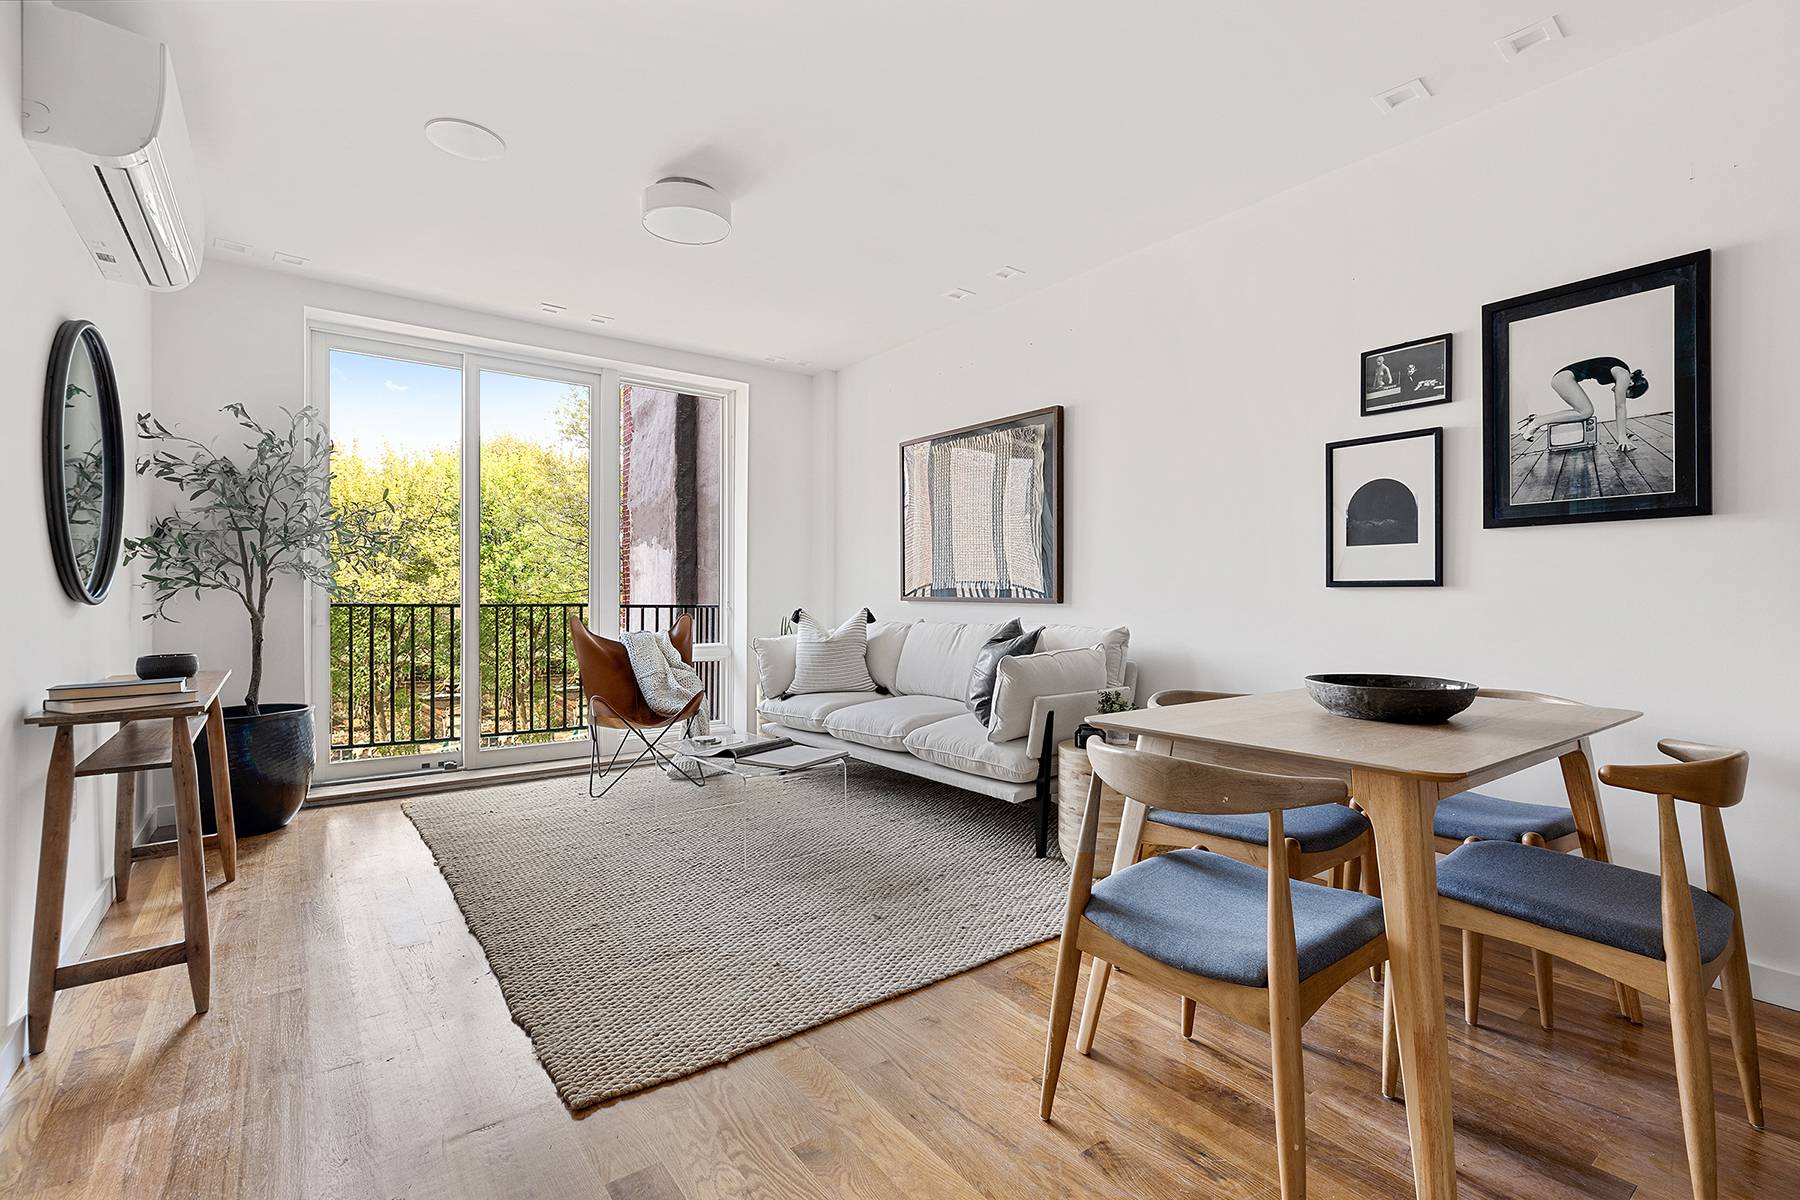 Welcome to 269 Malcolm X Boulevard, a charming new condominium in Stuyvesant Heights.